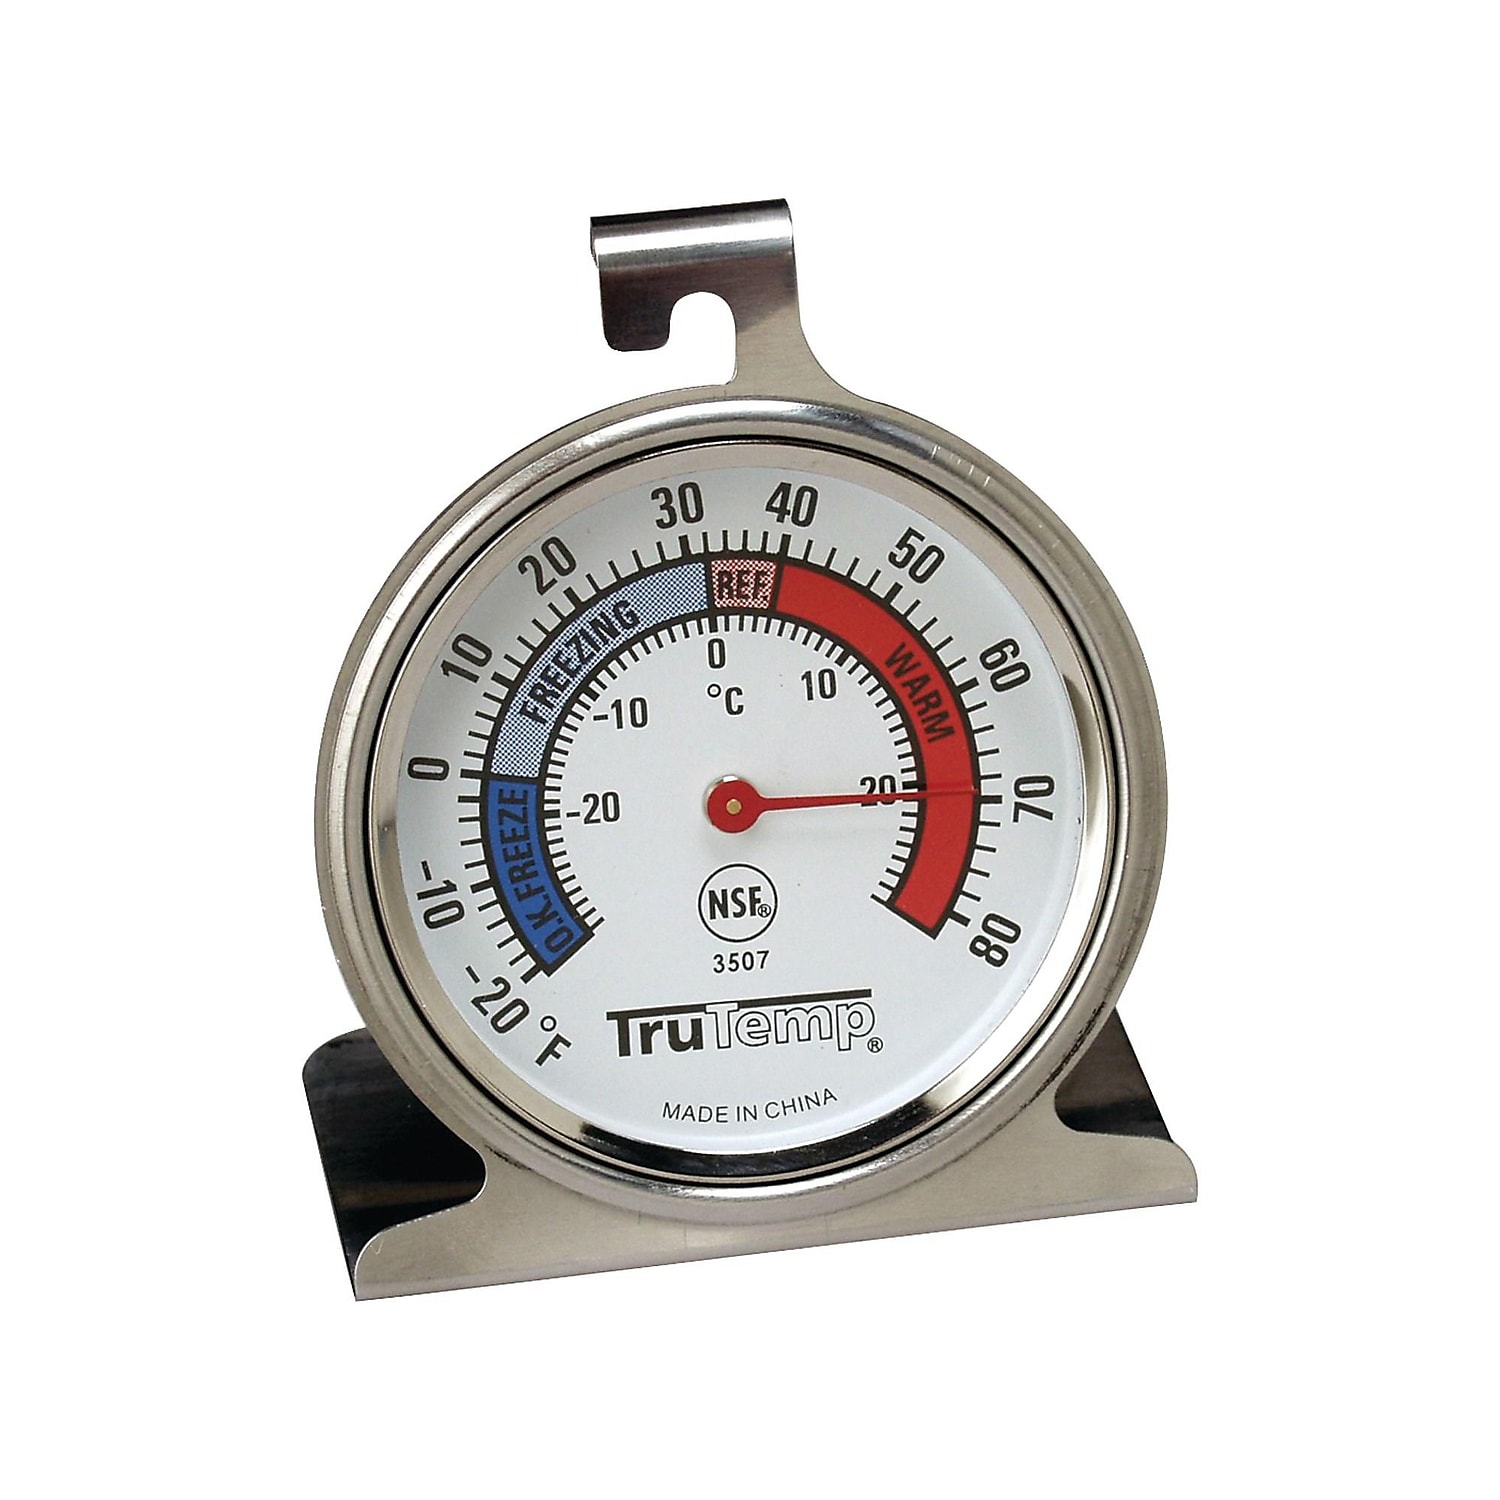 Taylor TruTemp Stainless Steel Thermometer Silver (3507) TAP3507 - image 1 of 6